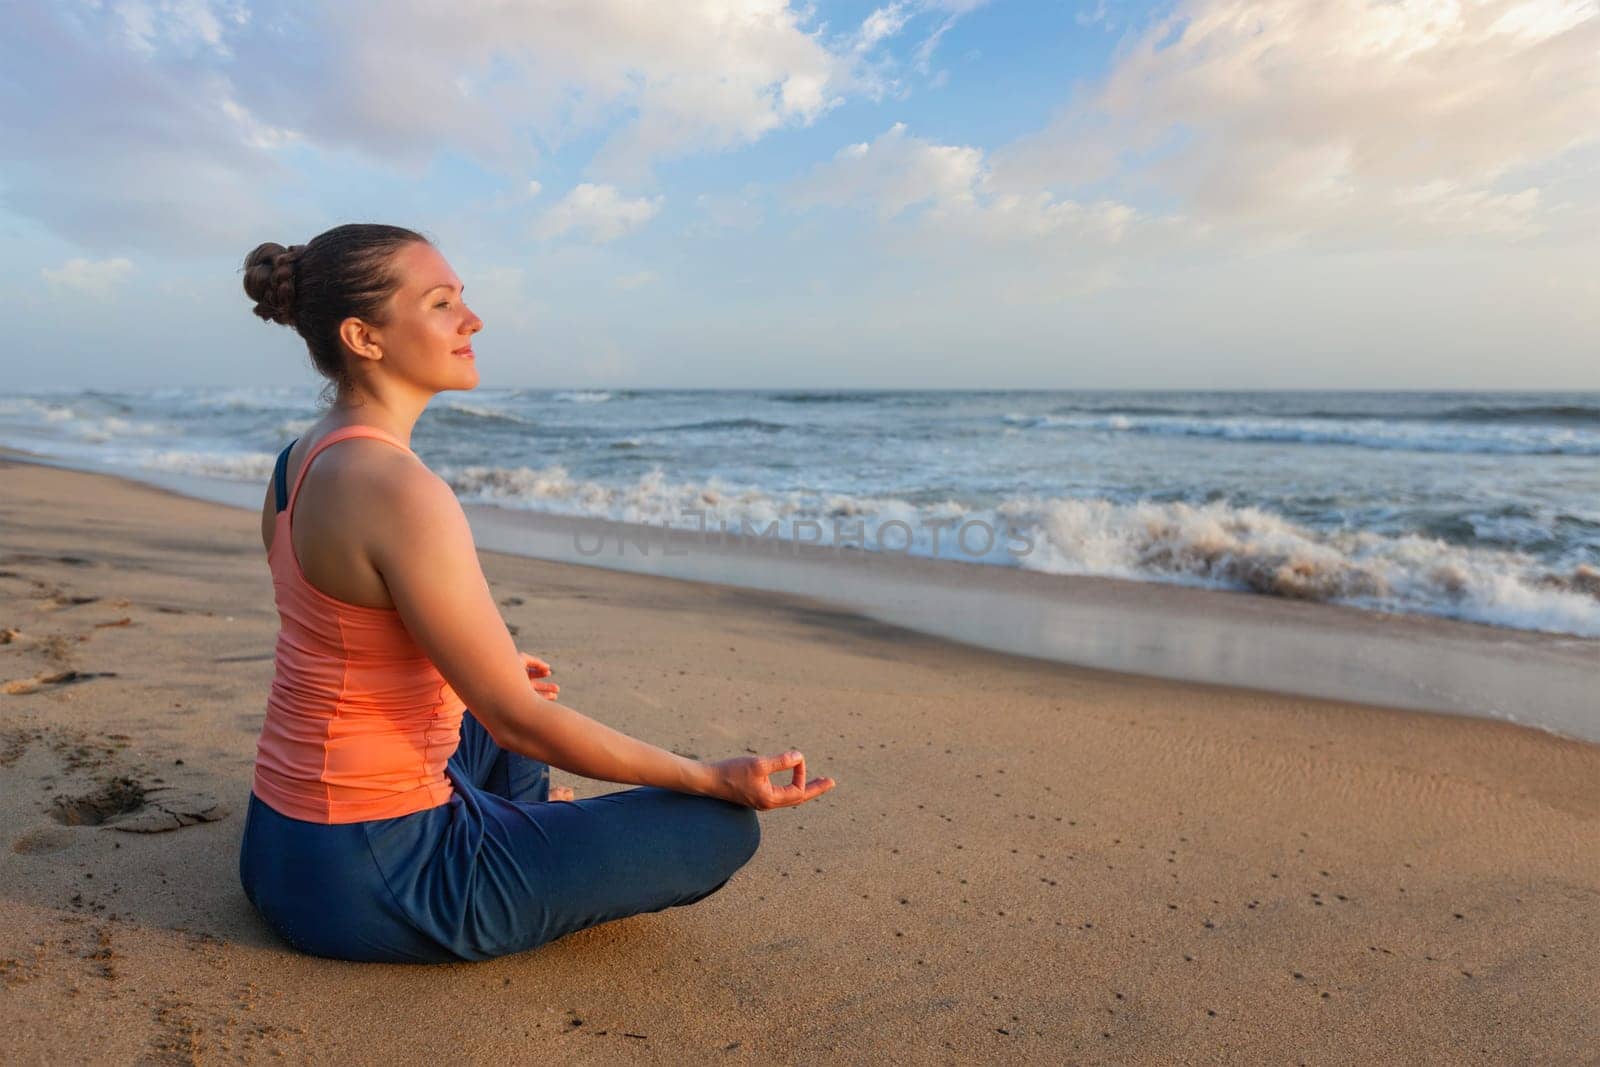 Woman doing yoga - meditate and relax in Padmasana Lotus asana pose with chin mudra outdoors at tropical beach on sunset